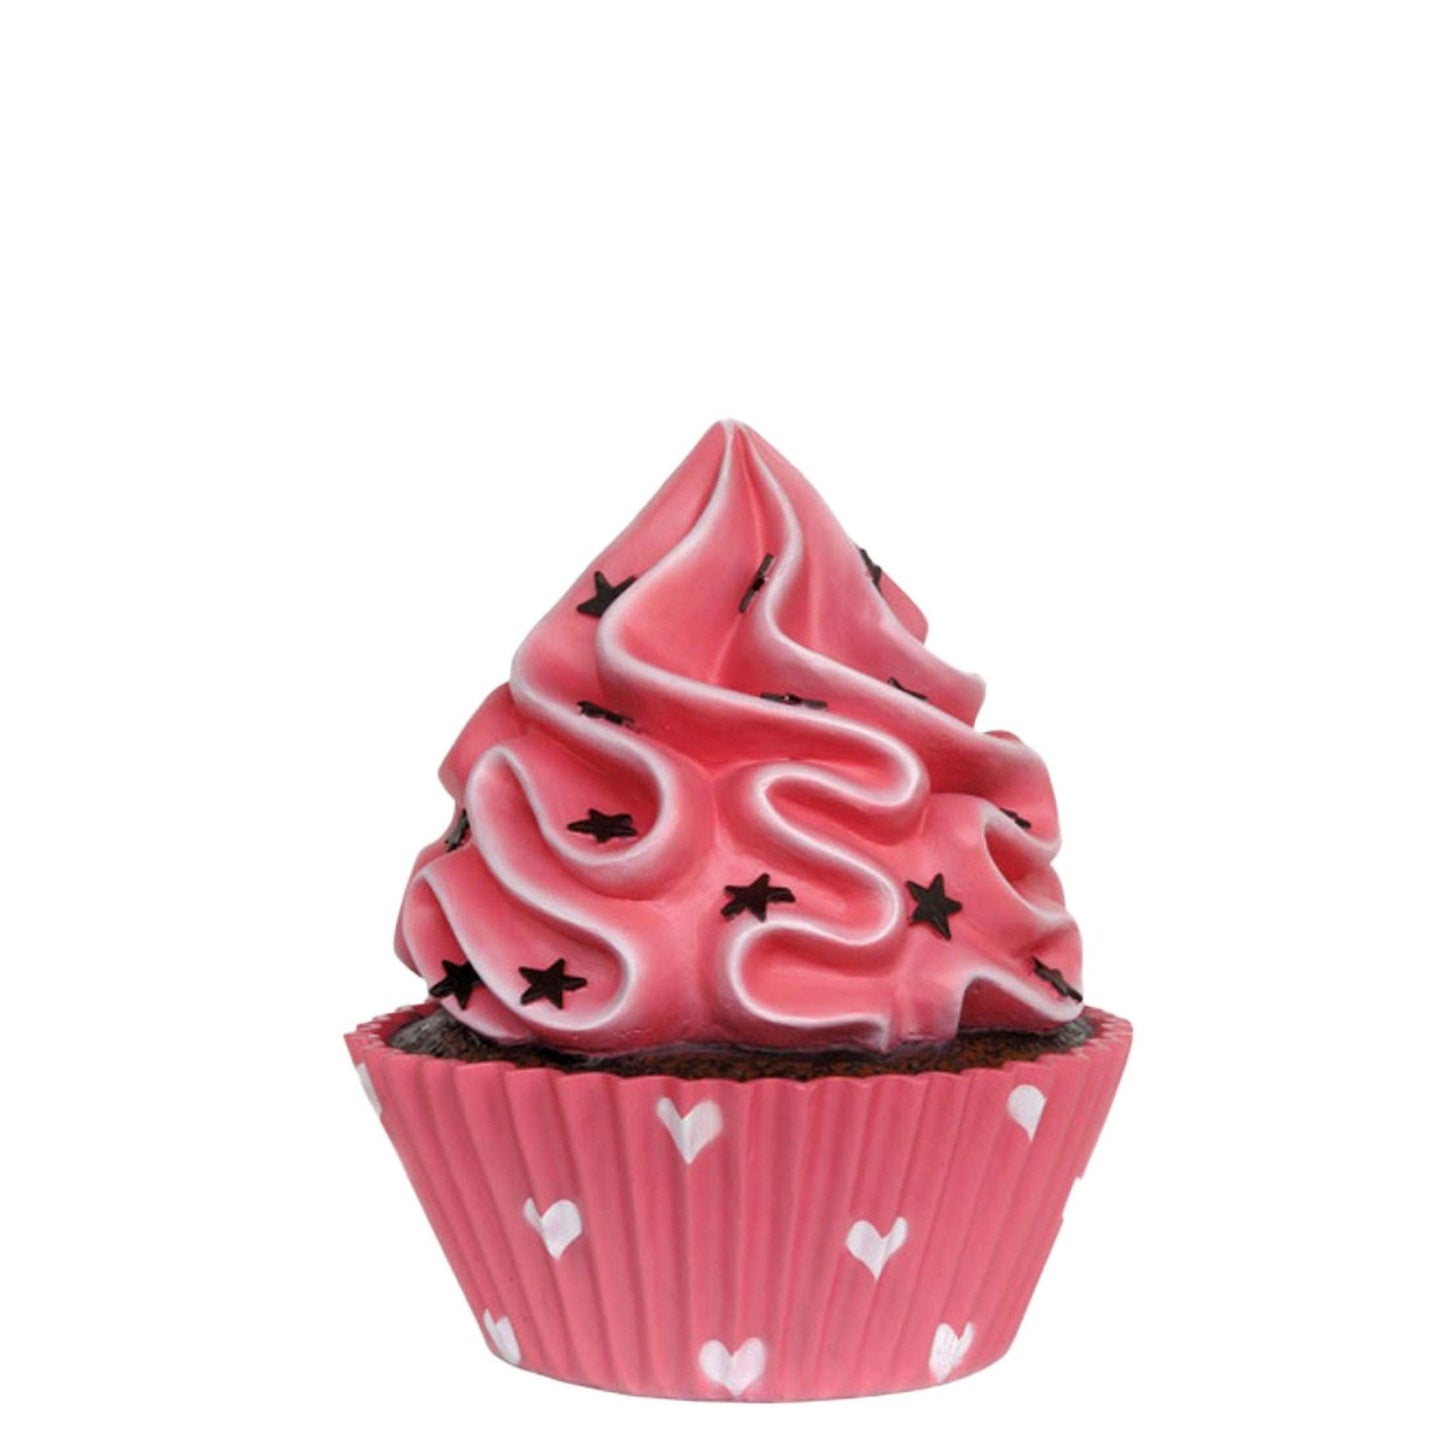 Bright Pink Cupcake With Stars Statue